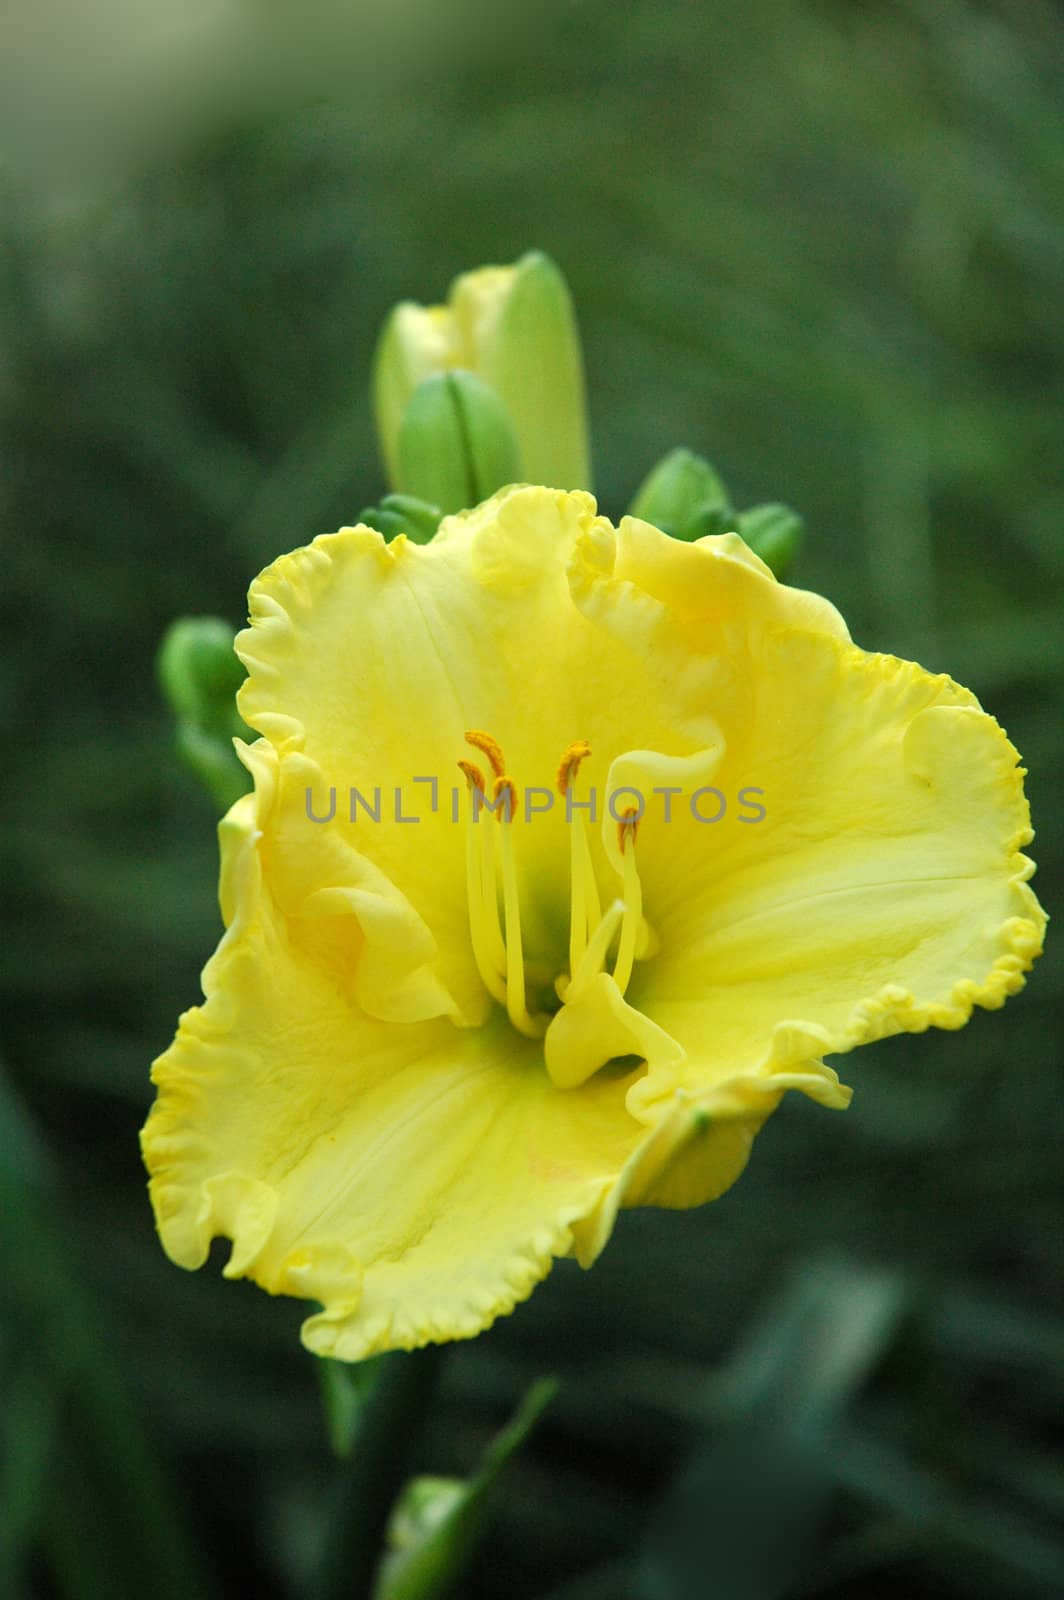 yellow flower in front of green blurred background made of grass